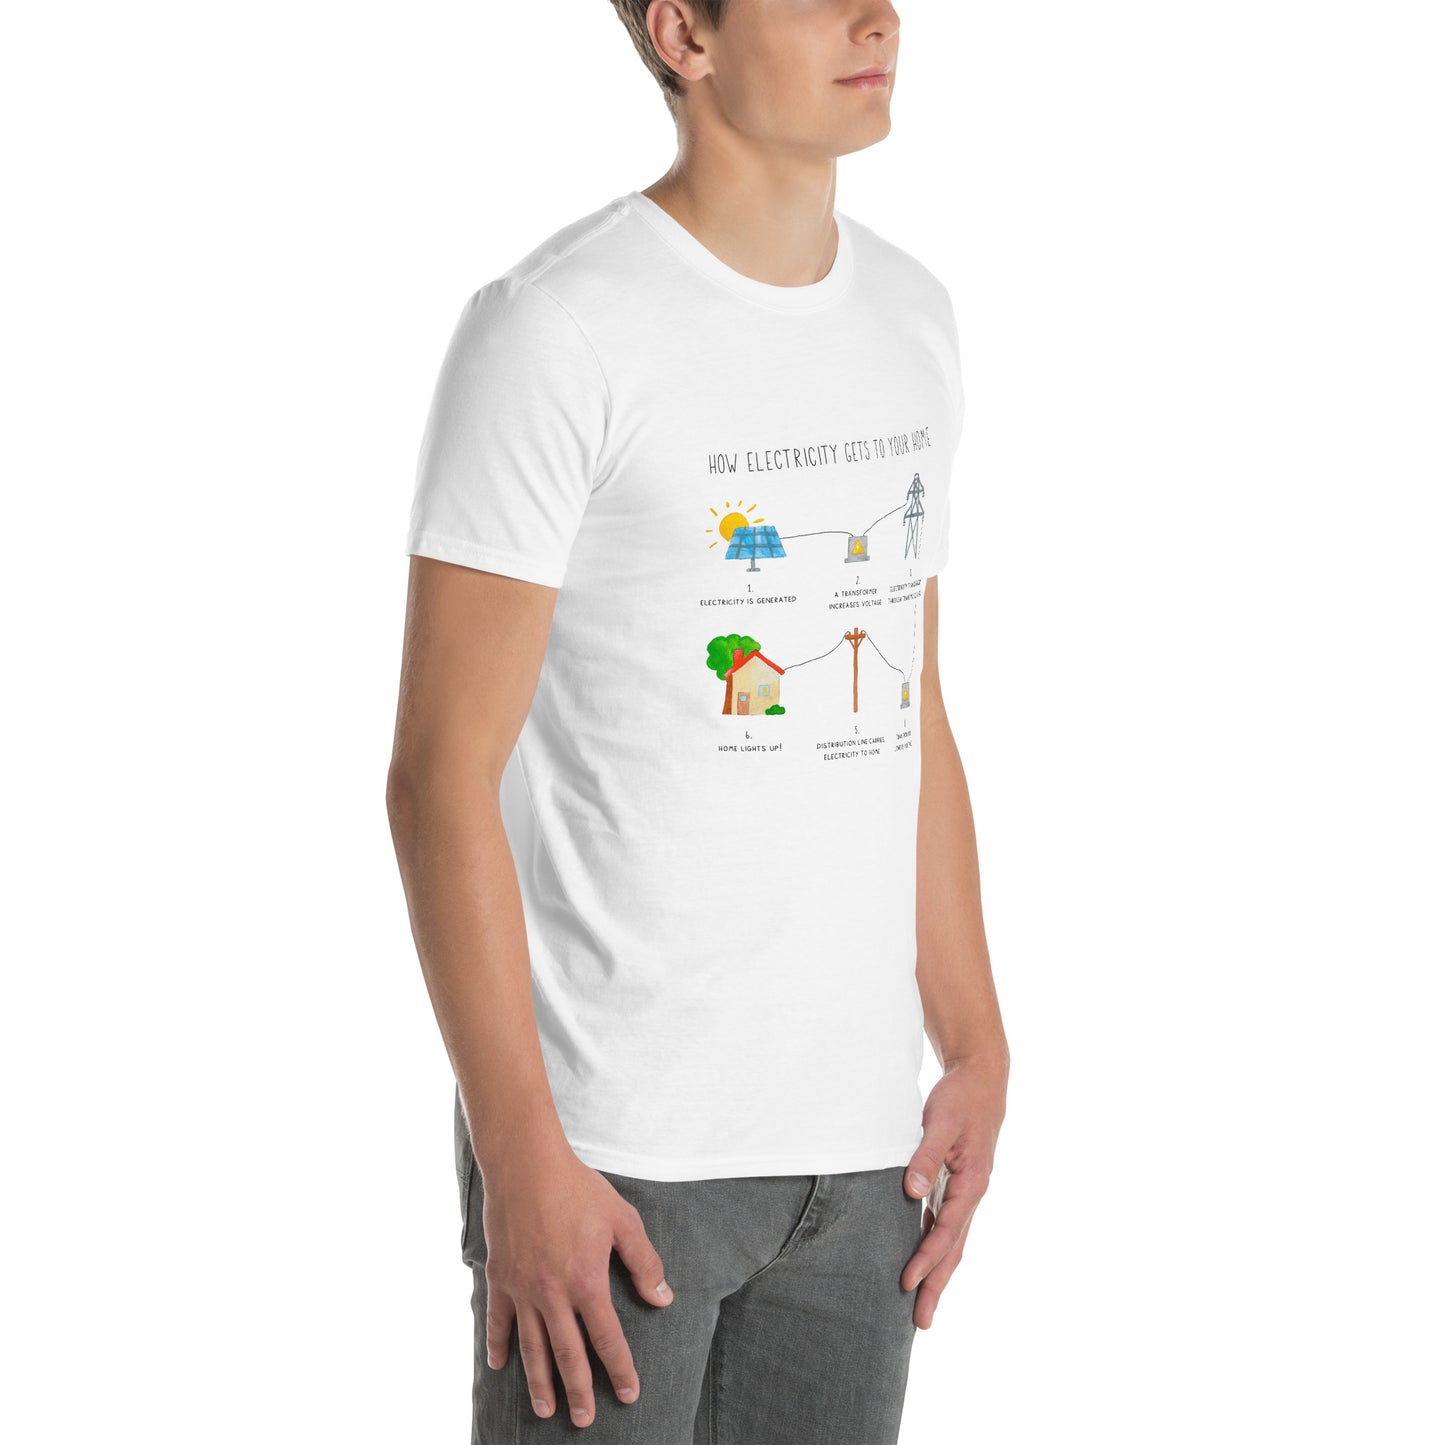 How Electricity Gets To Your Home Short-Sleeve Unisex T-Shirt